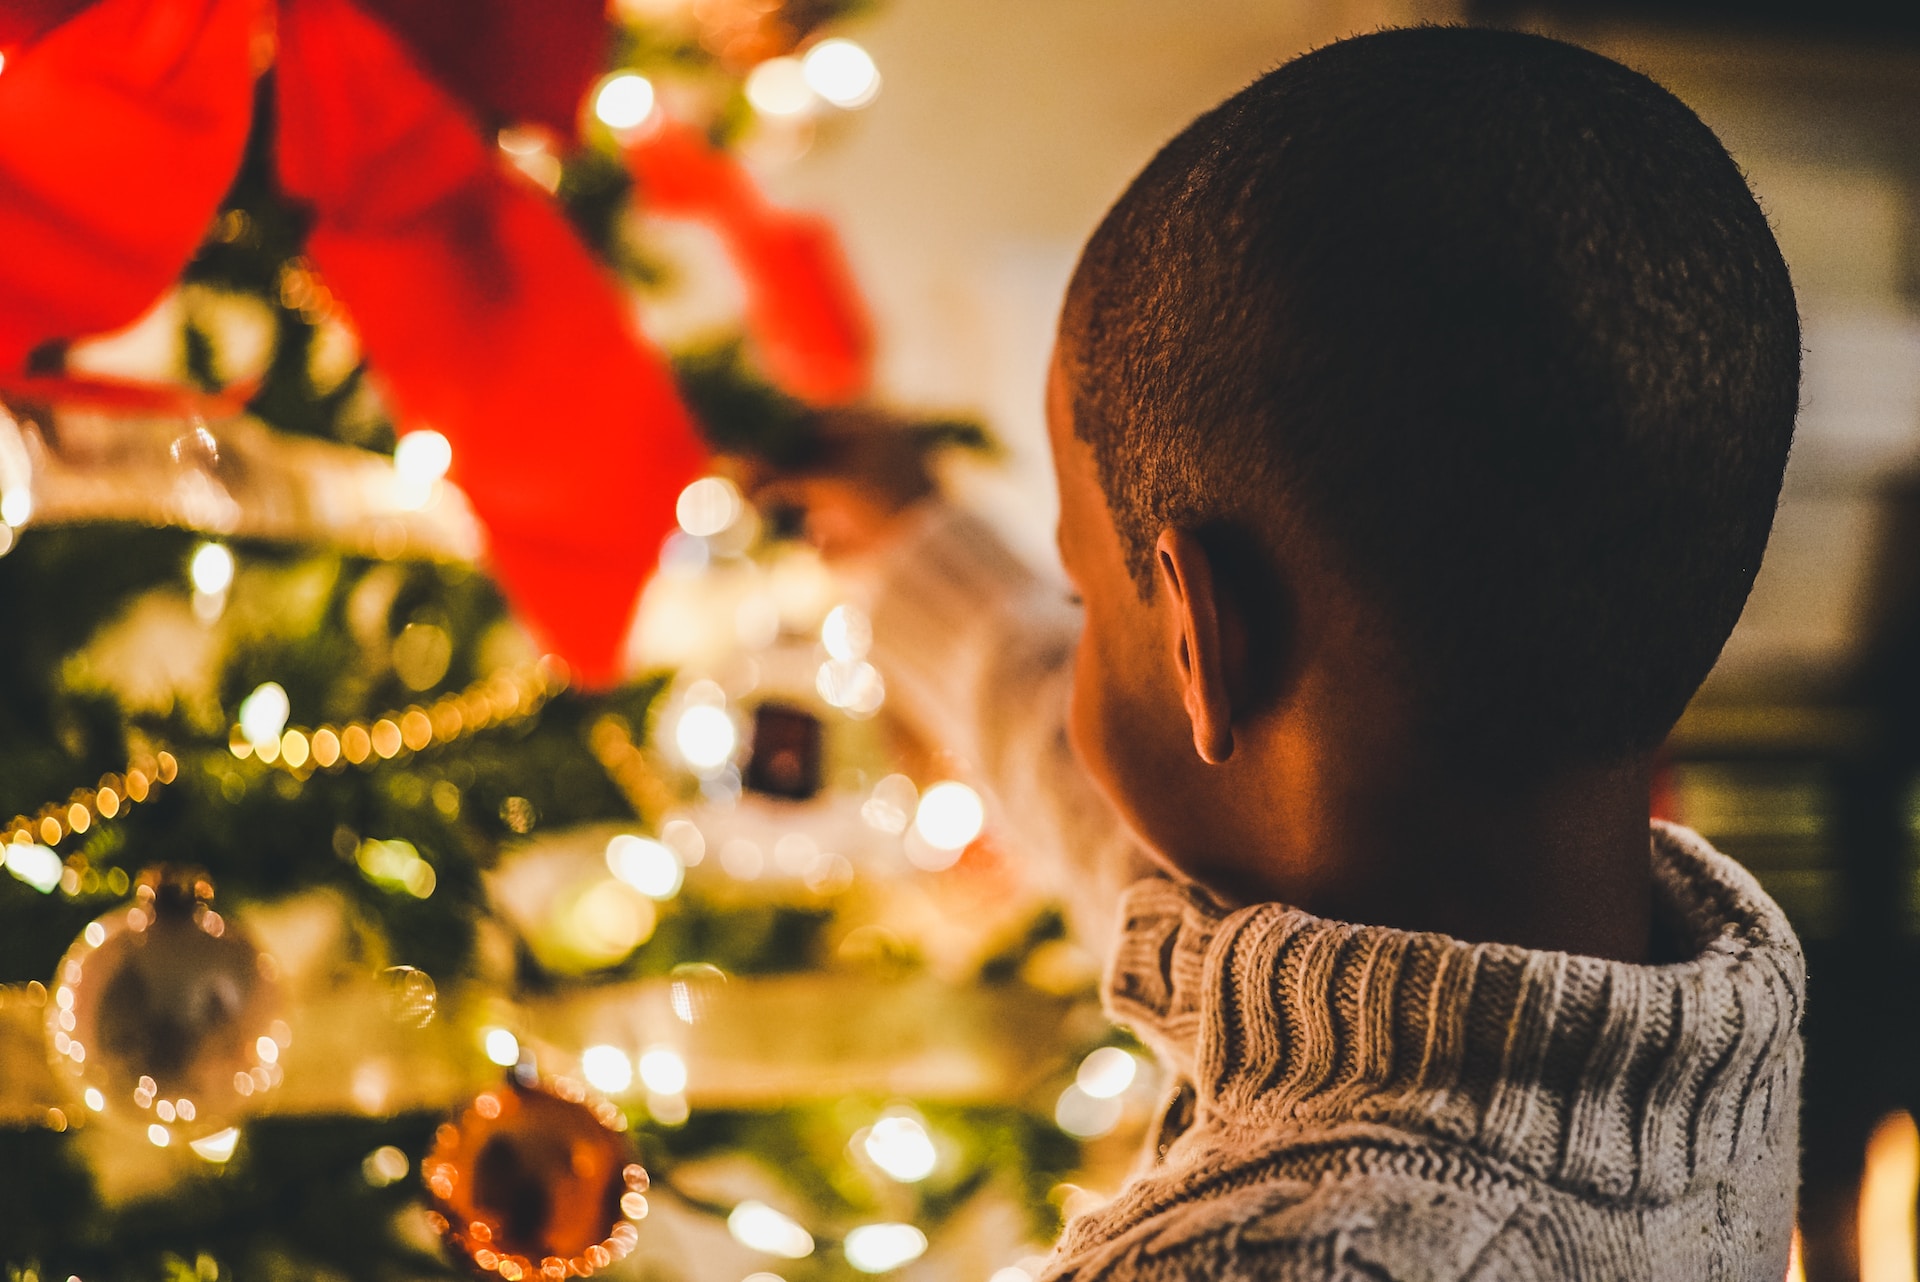 Child next to decorated tree